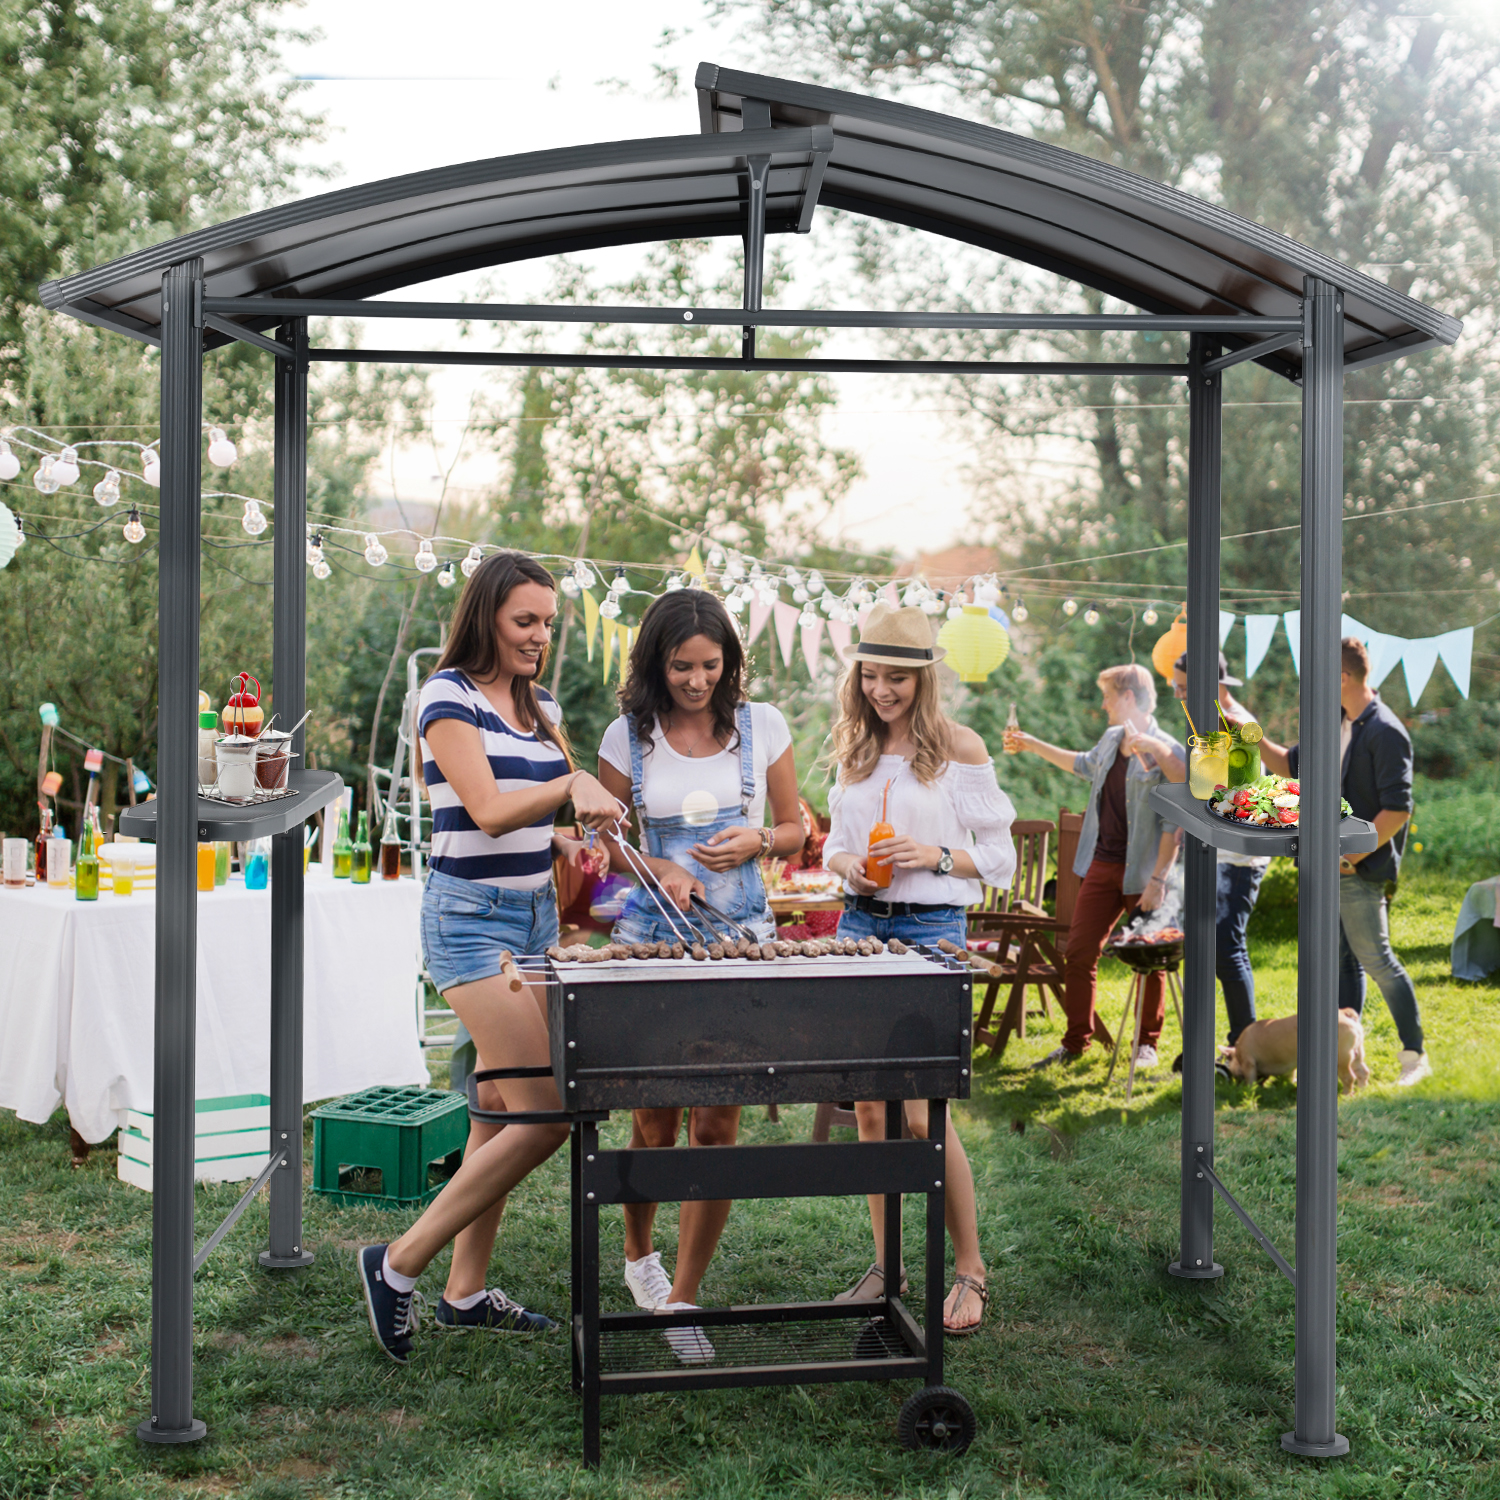 Aoodor 8 x 5 ft. BBQ Grill Gazebo Shelter, Gray Steel Frame with Side Shelves,  for Outdoor, Patio, Backyard - image 1 of 7